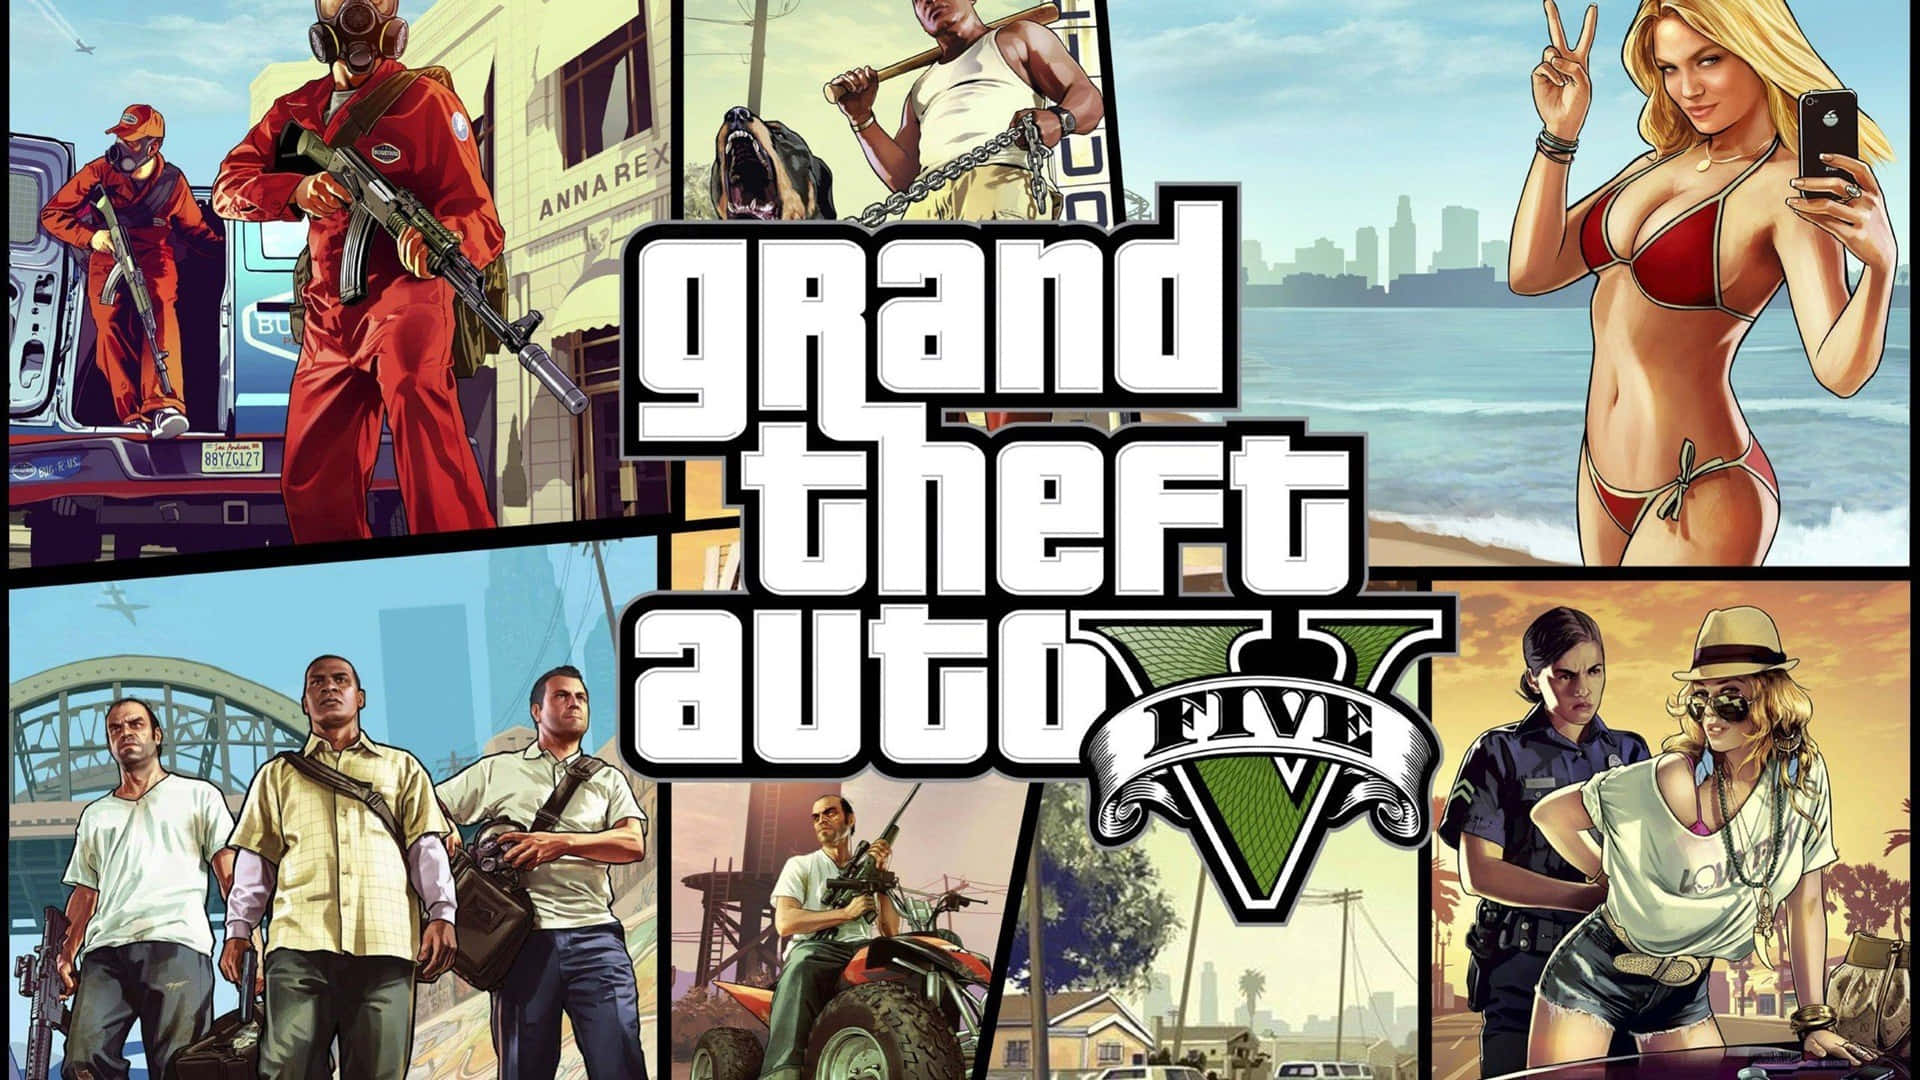 Take on groundbreaking missions in the world of Grand Theft Auto V